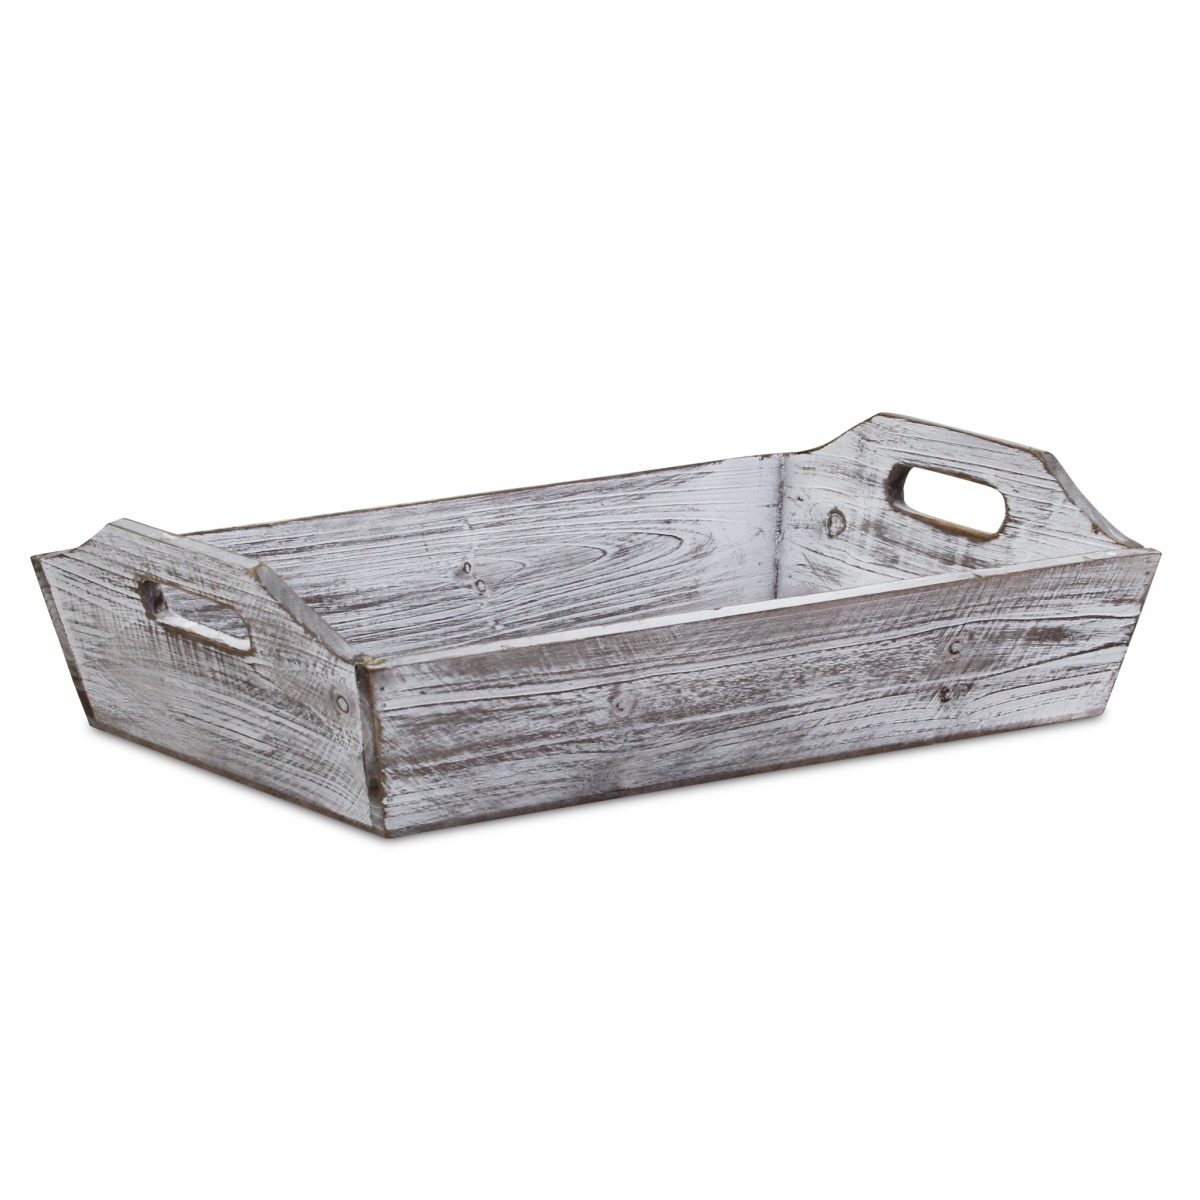 Rectangular White Wash Rustic Finish Wood Serving Tray with Handles